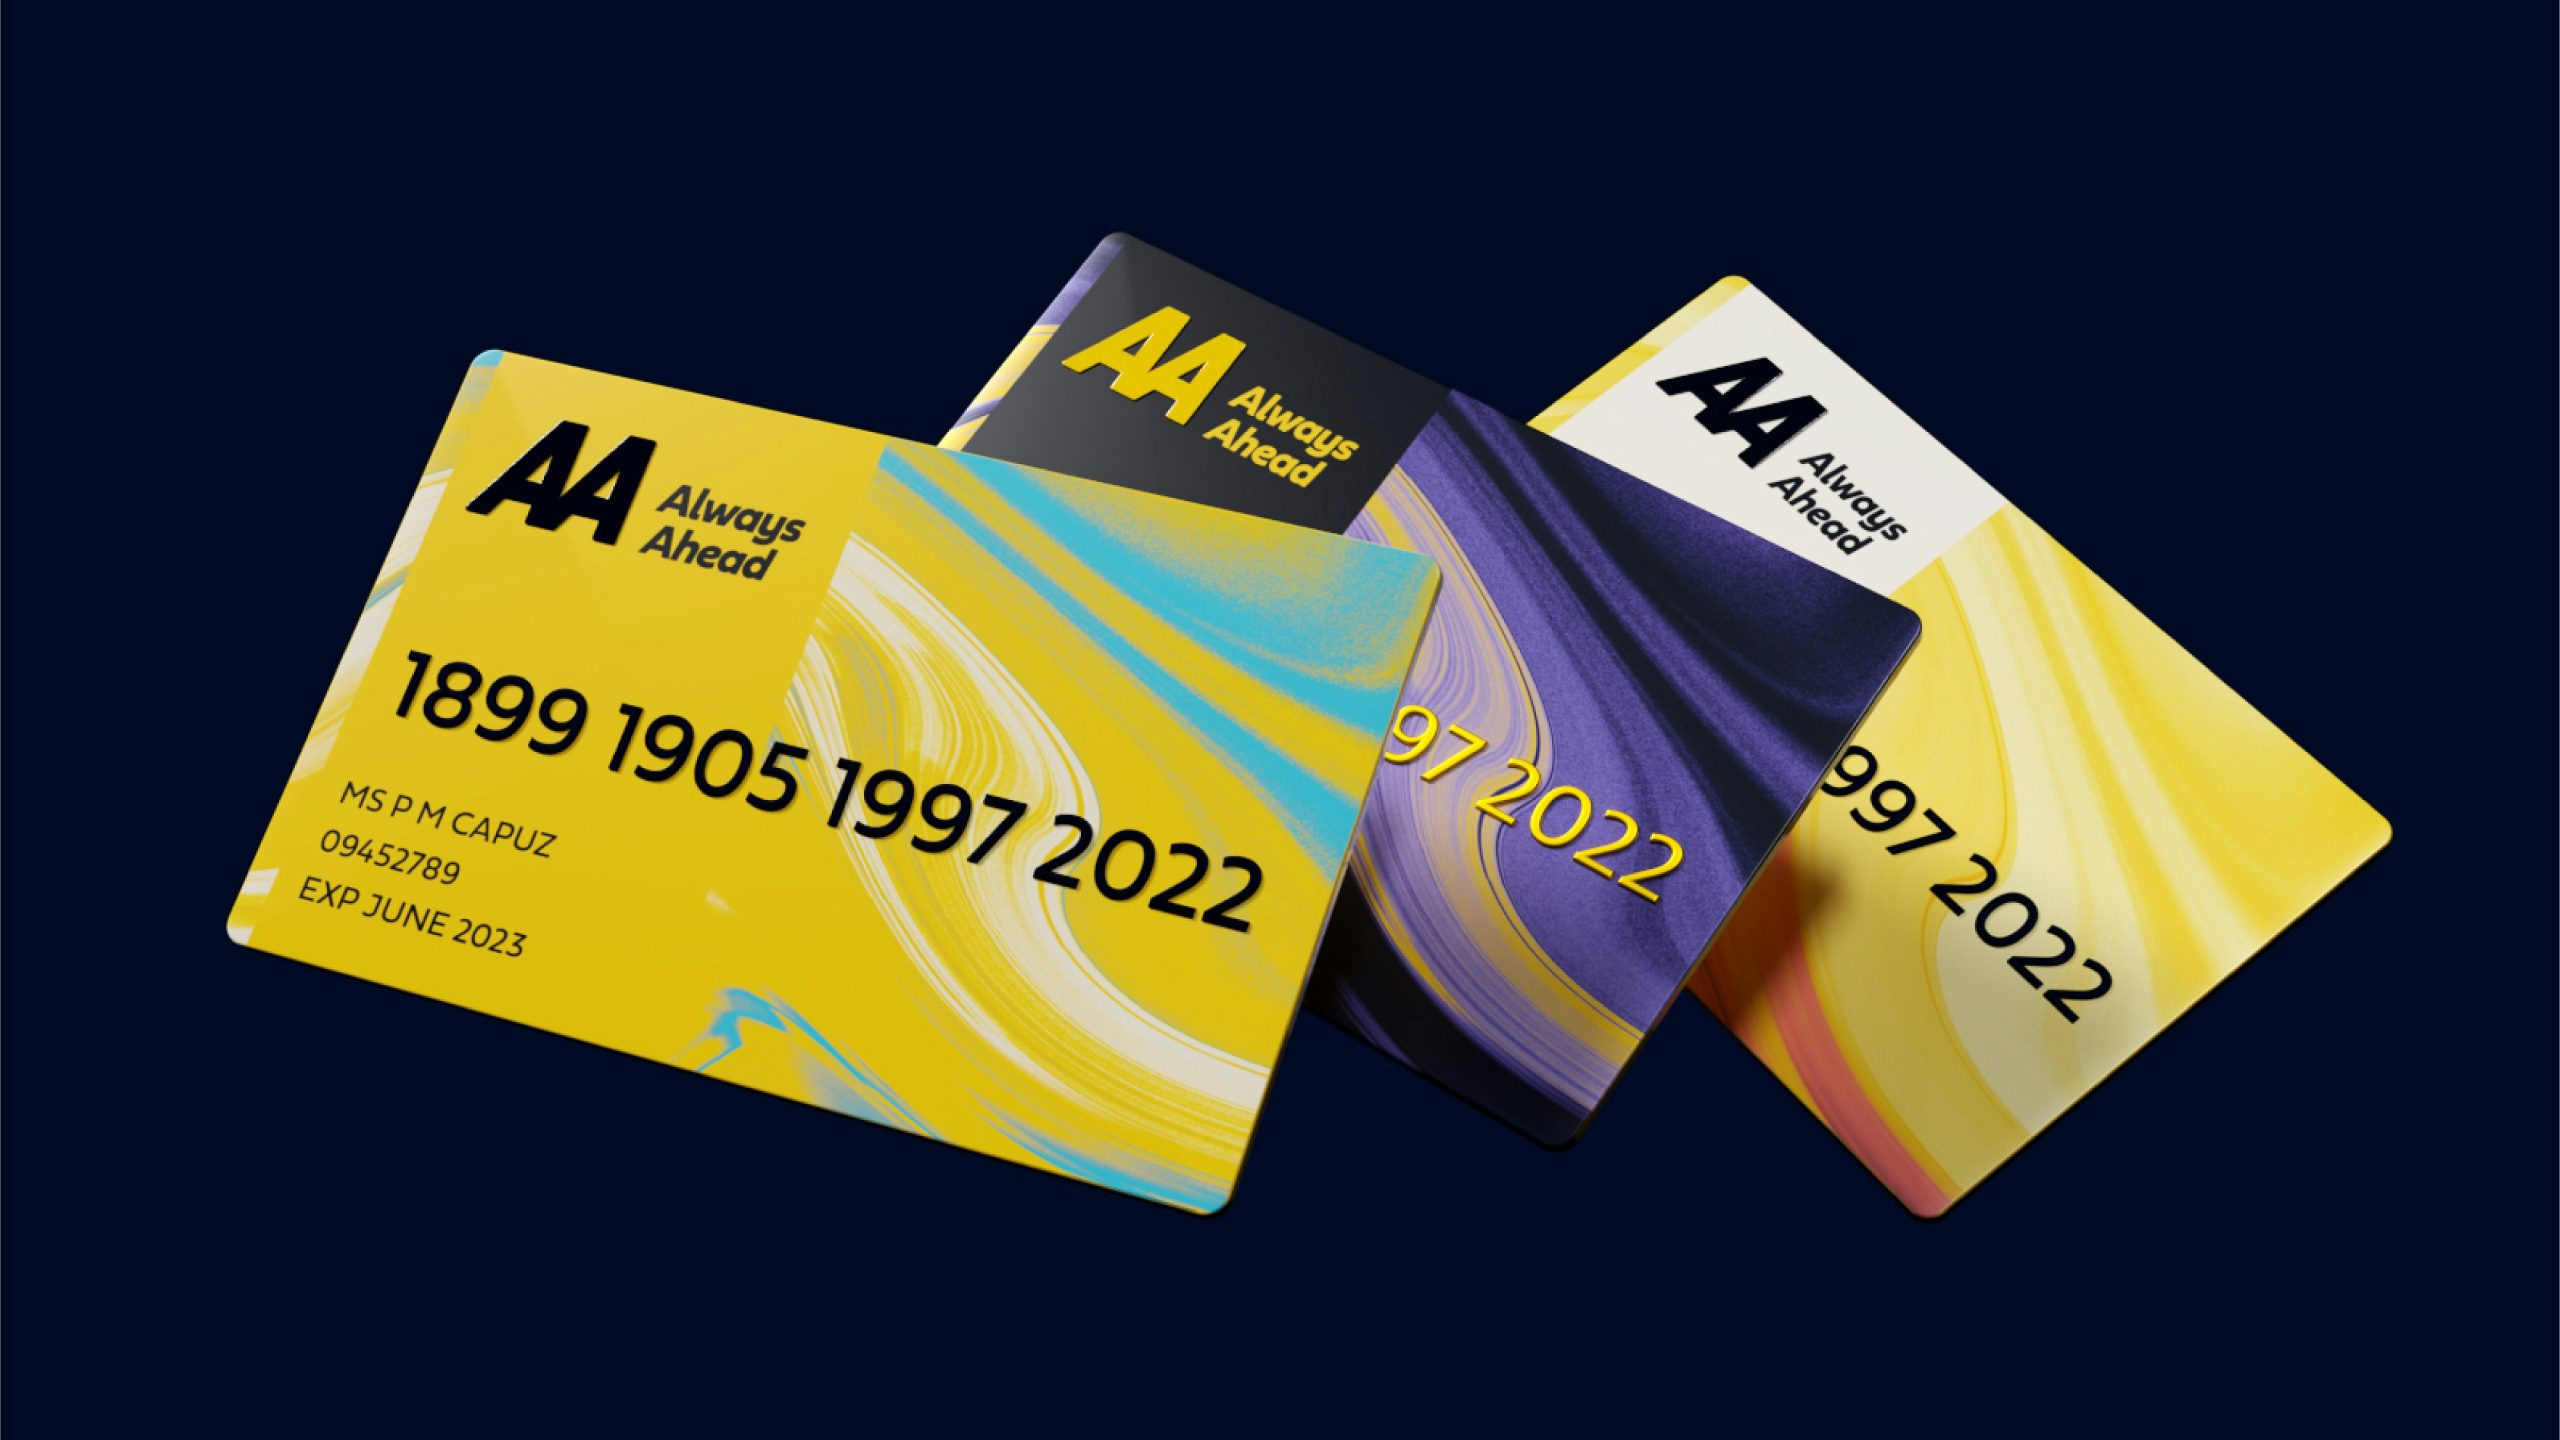 Image shows three membership cards for the AA, two with a swirling pattern on a yellow background, another showing a purple and yellow swirling background